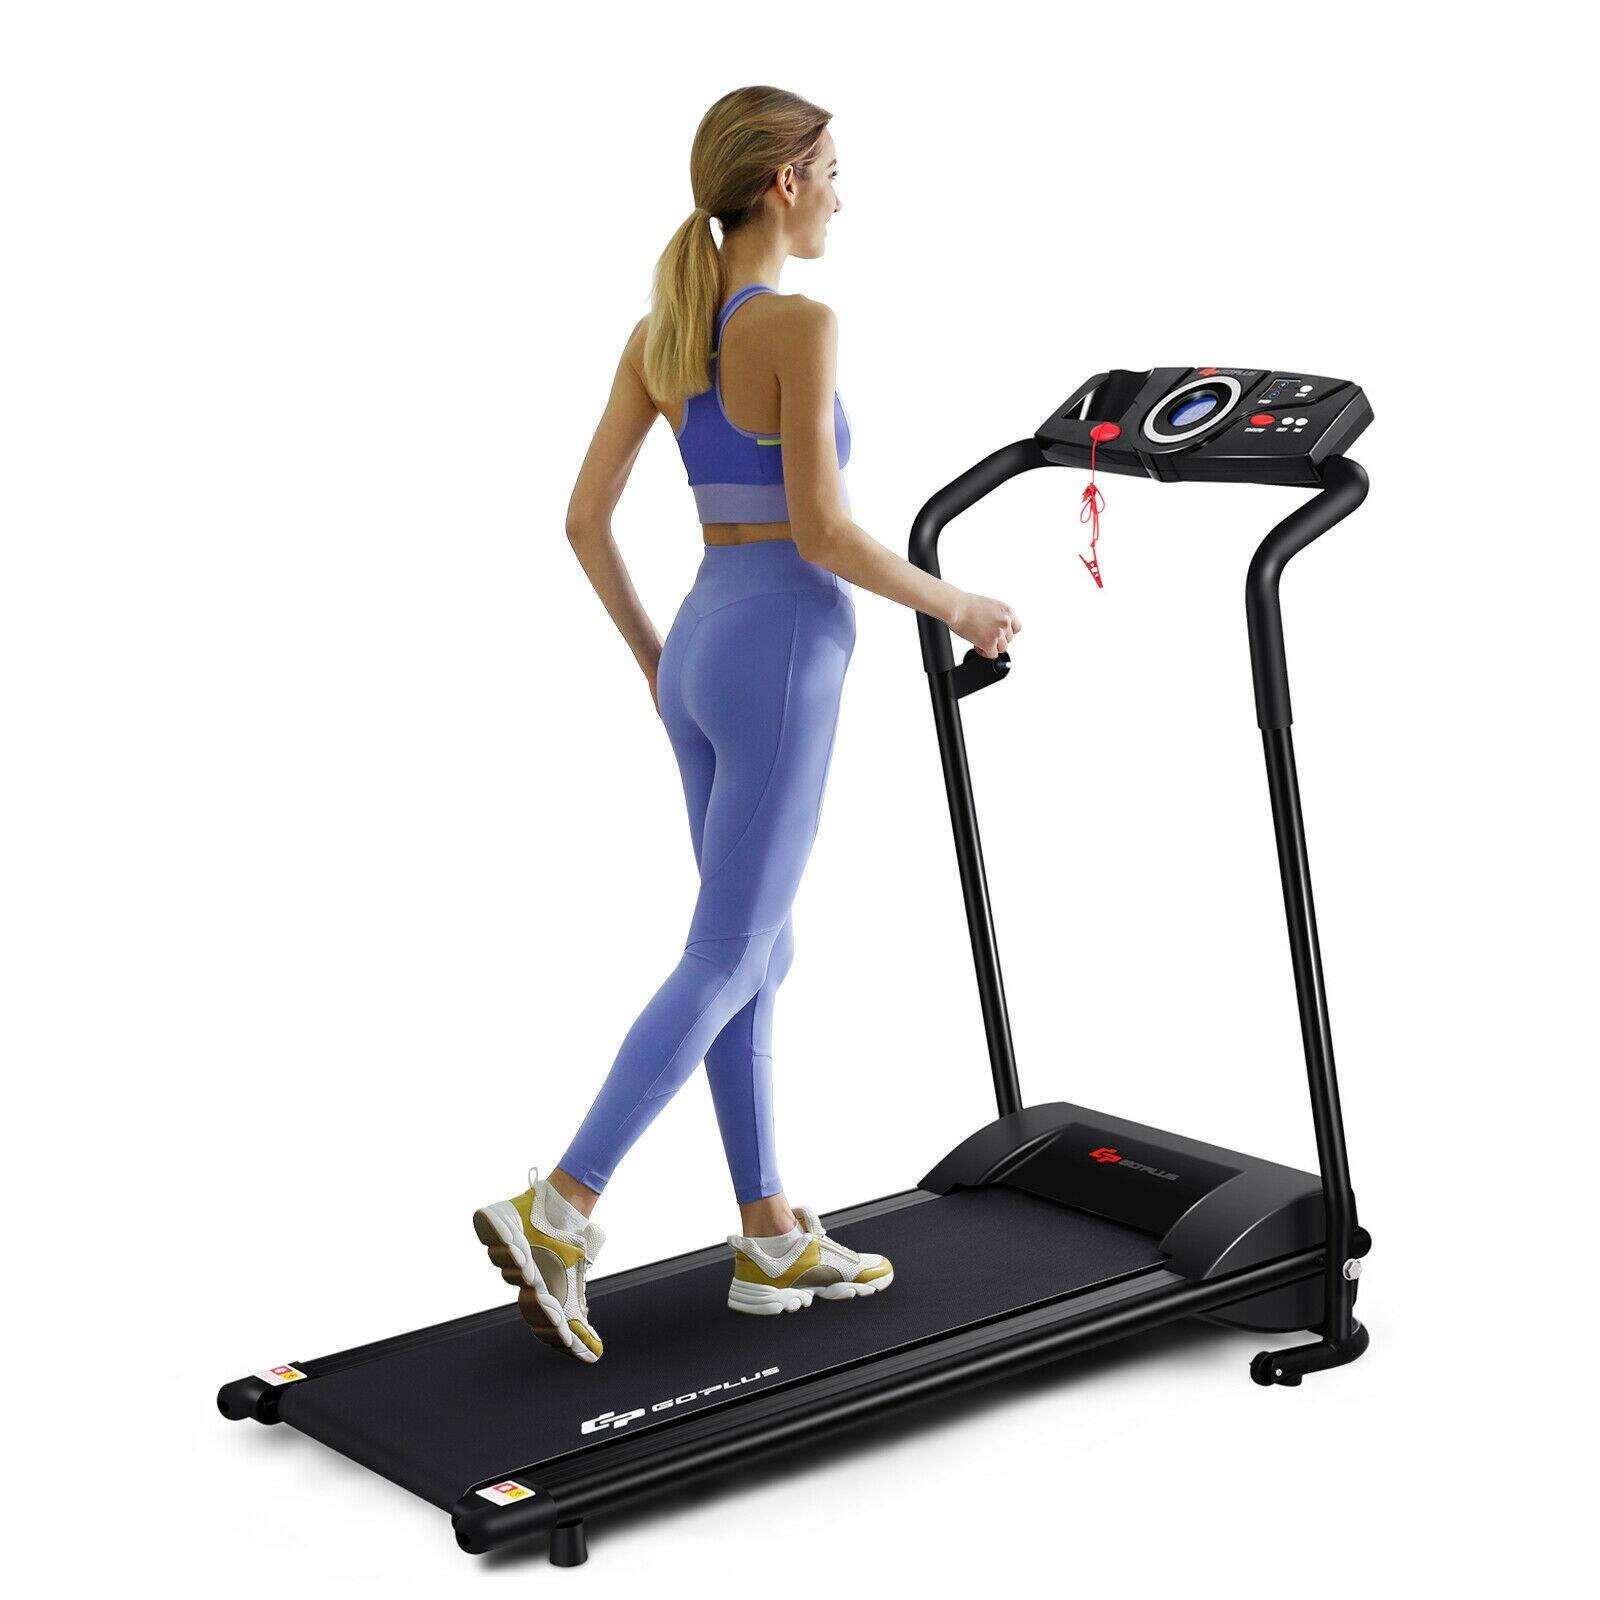 Costway 1 HP Electric Motorized Power Folding Walking/Running Treadmill Machine with Operation Display - $239.95 + Free Shipping